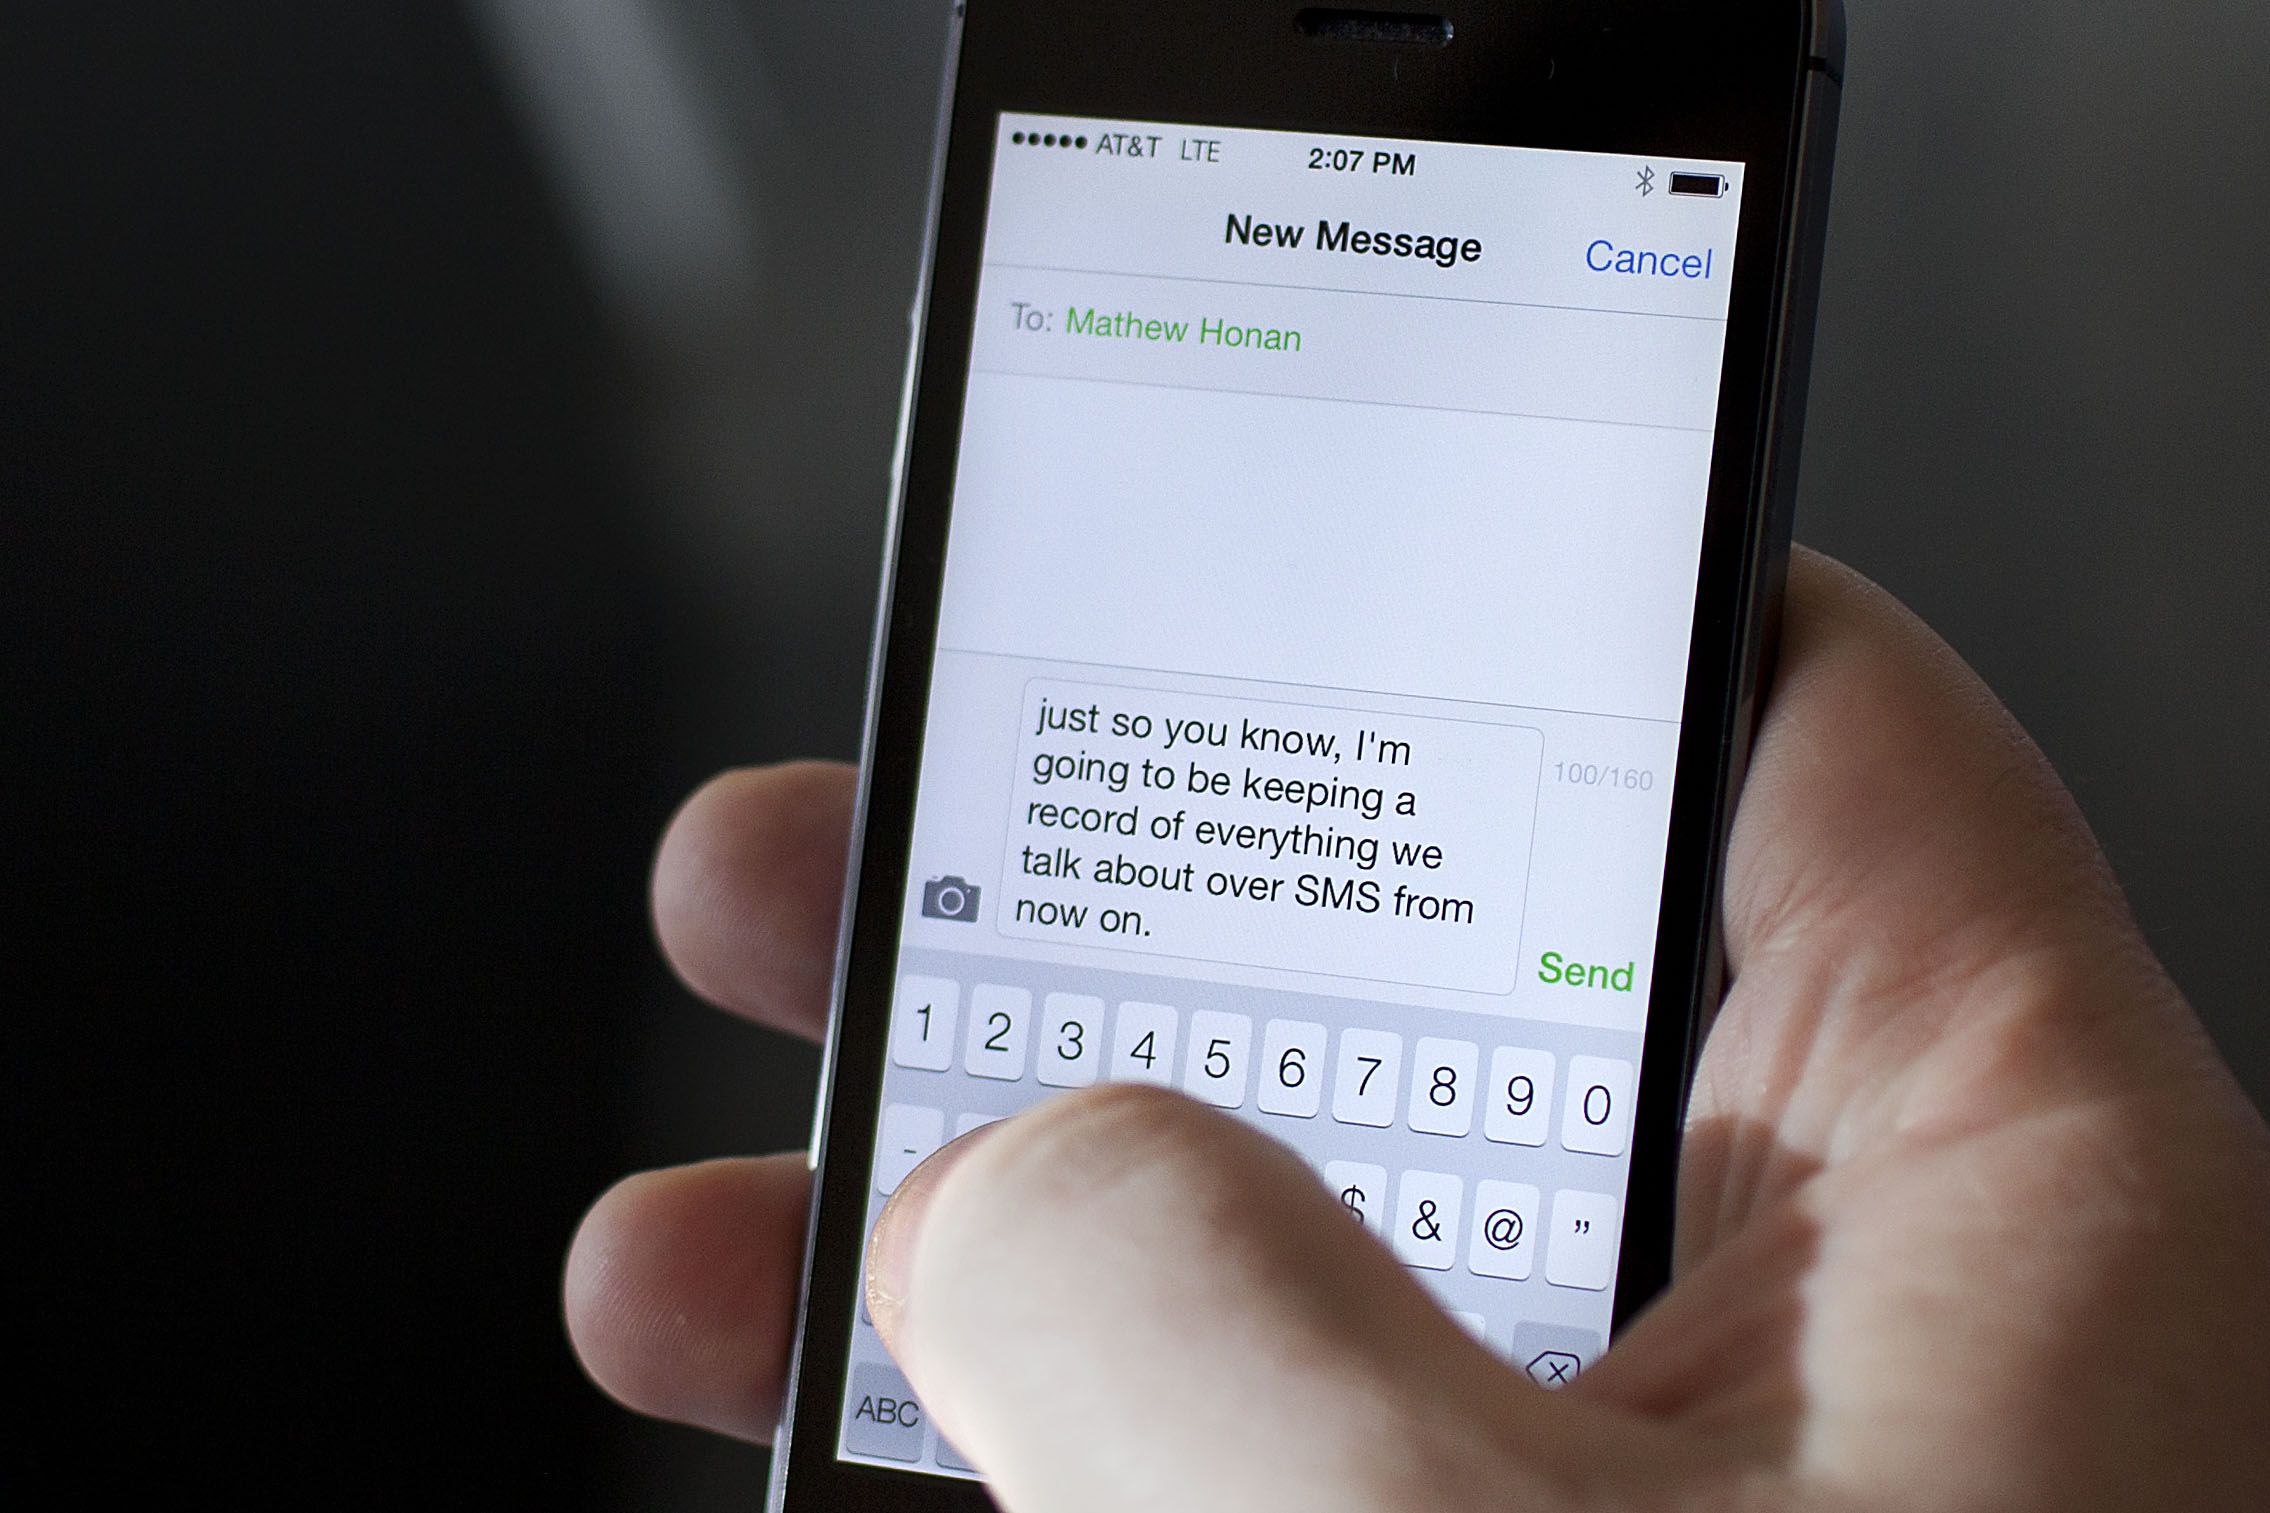 How do you retrieve deleted messages on your mobile phone?